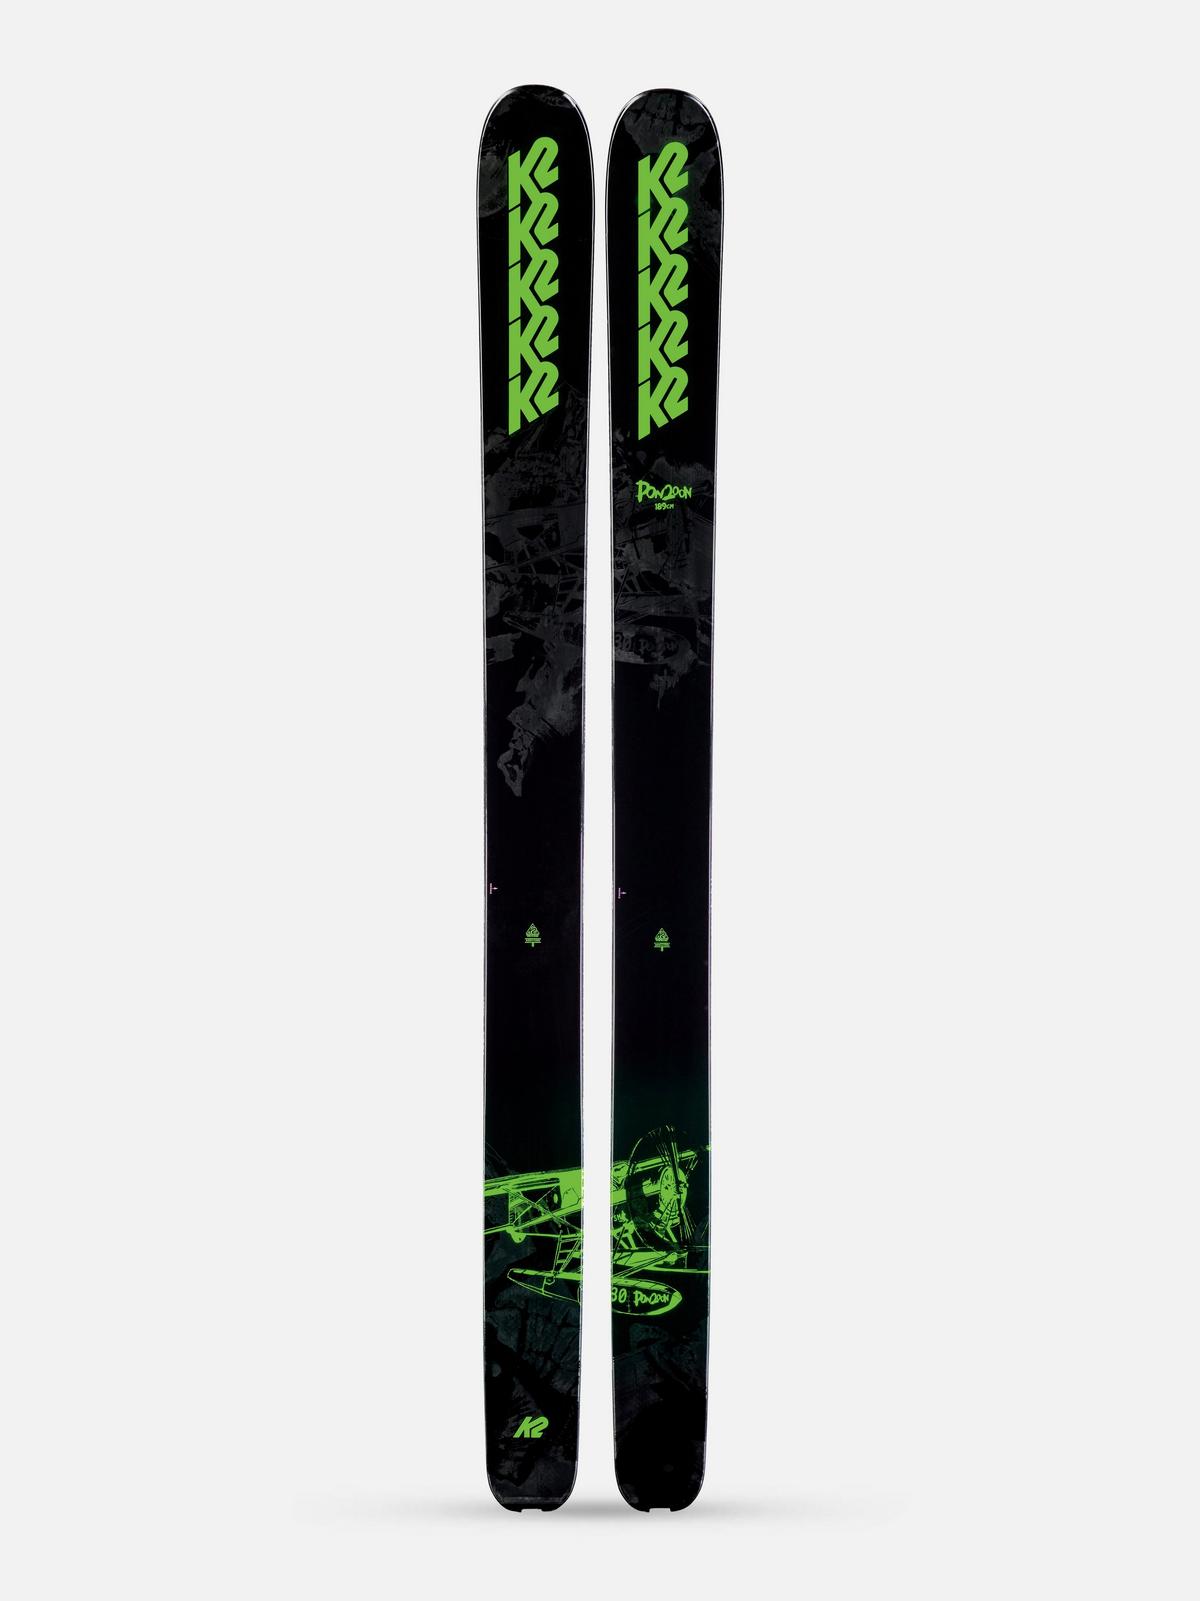 2020 189 cm K2 Pon2oon Pontoon Skis with or without Look Pivot 14 GW 